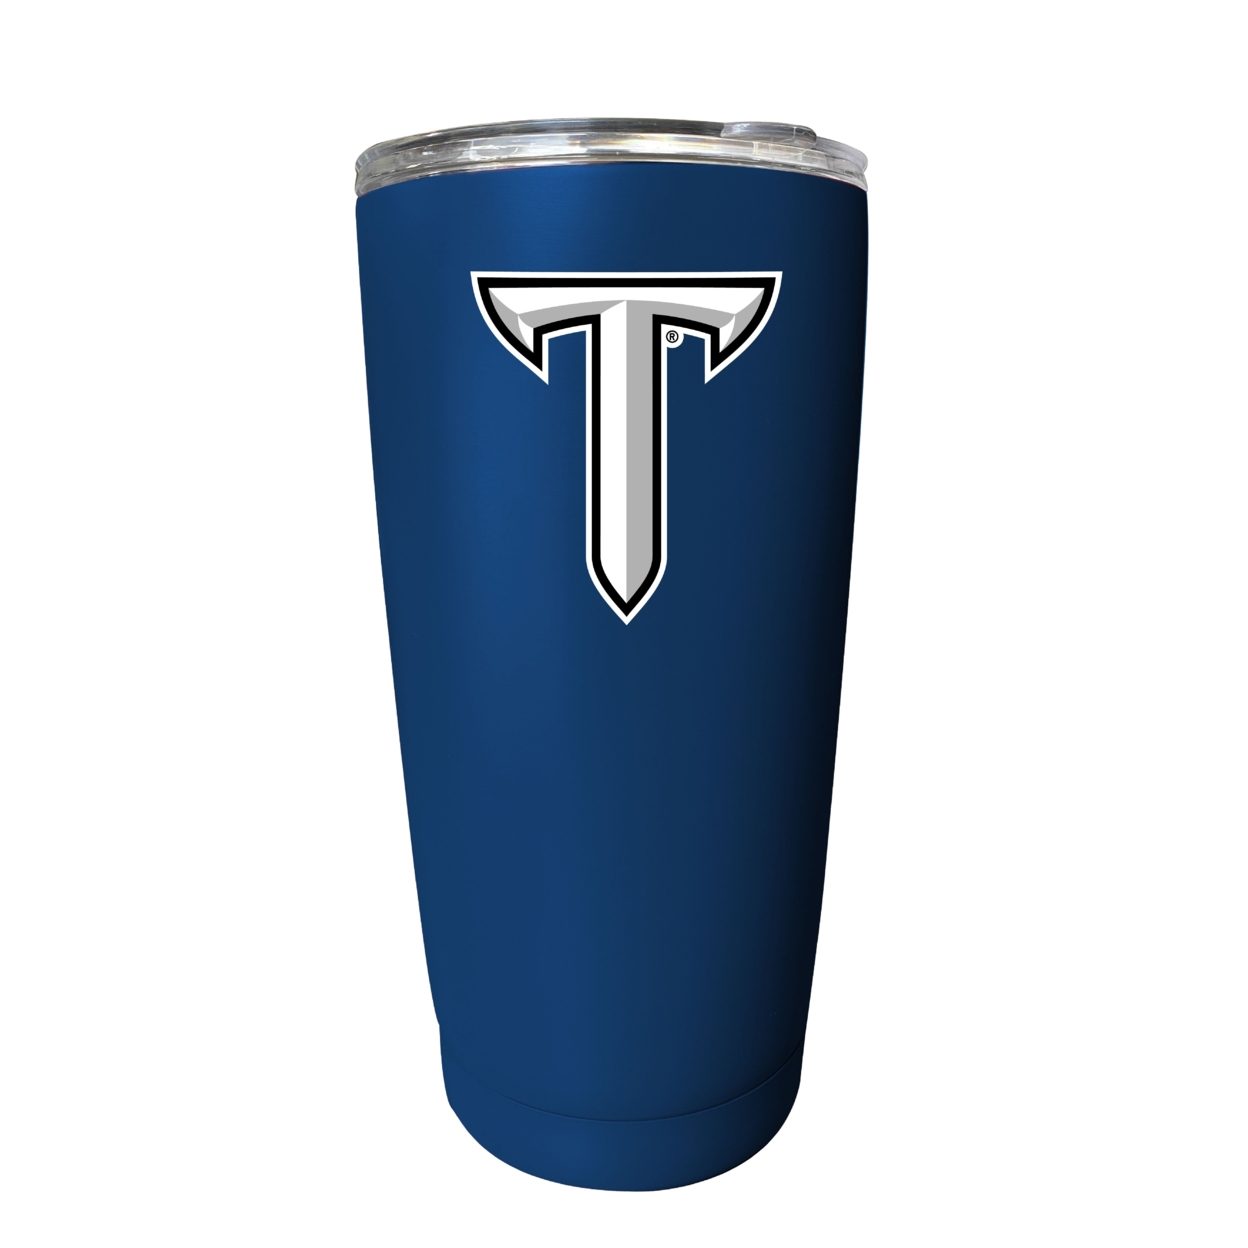 Troy University 16 Oz Insulated Stainless Steel Tumblers - Choose Your Color - Navy